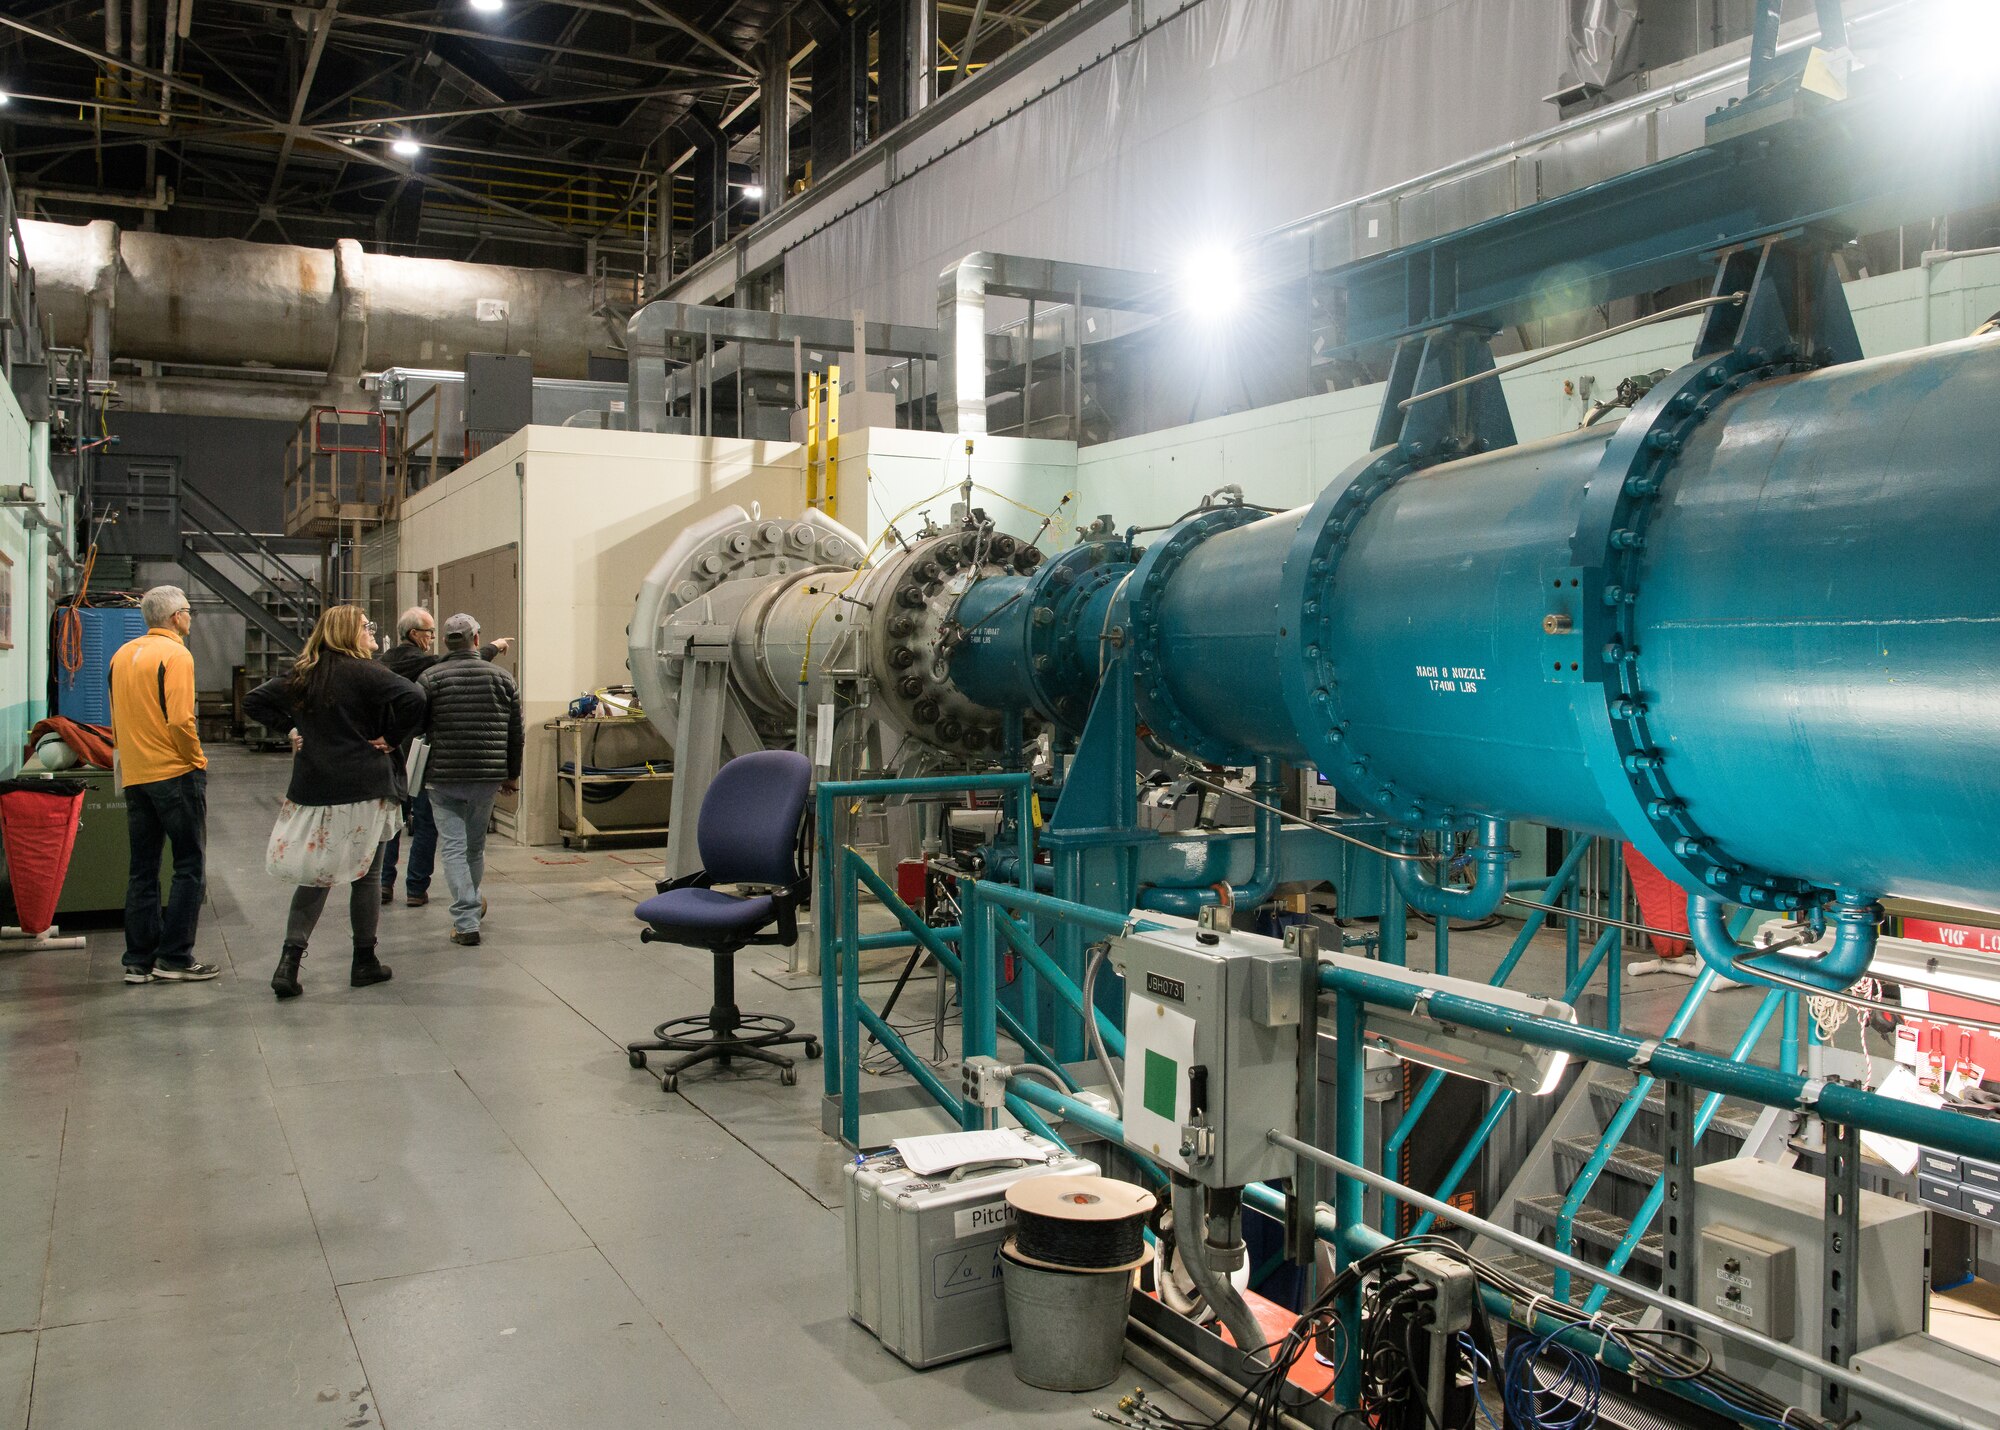 Arnold Engineering Development Complex team members look at Tunnel B in the von Kármán Gas Dynamics Facility at Arnold Air Force Base, Tenn., March 12, 2020. The wind tunnel is used to conduct aerodynamic testing at hypersonic speeds. (U.S. Air Force photo by Jill Pickett)